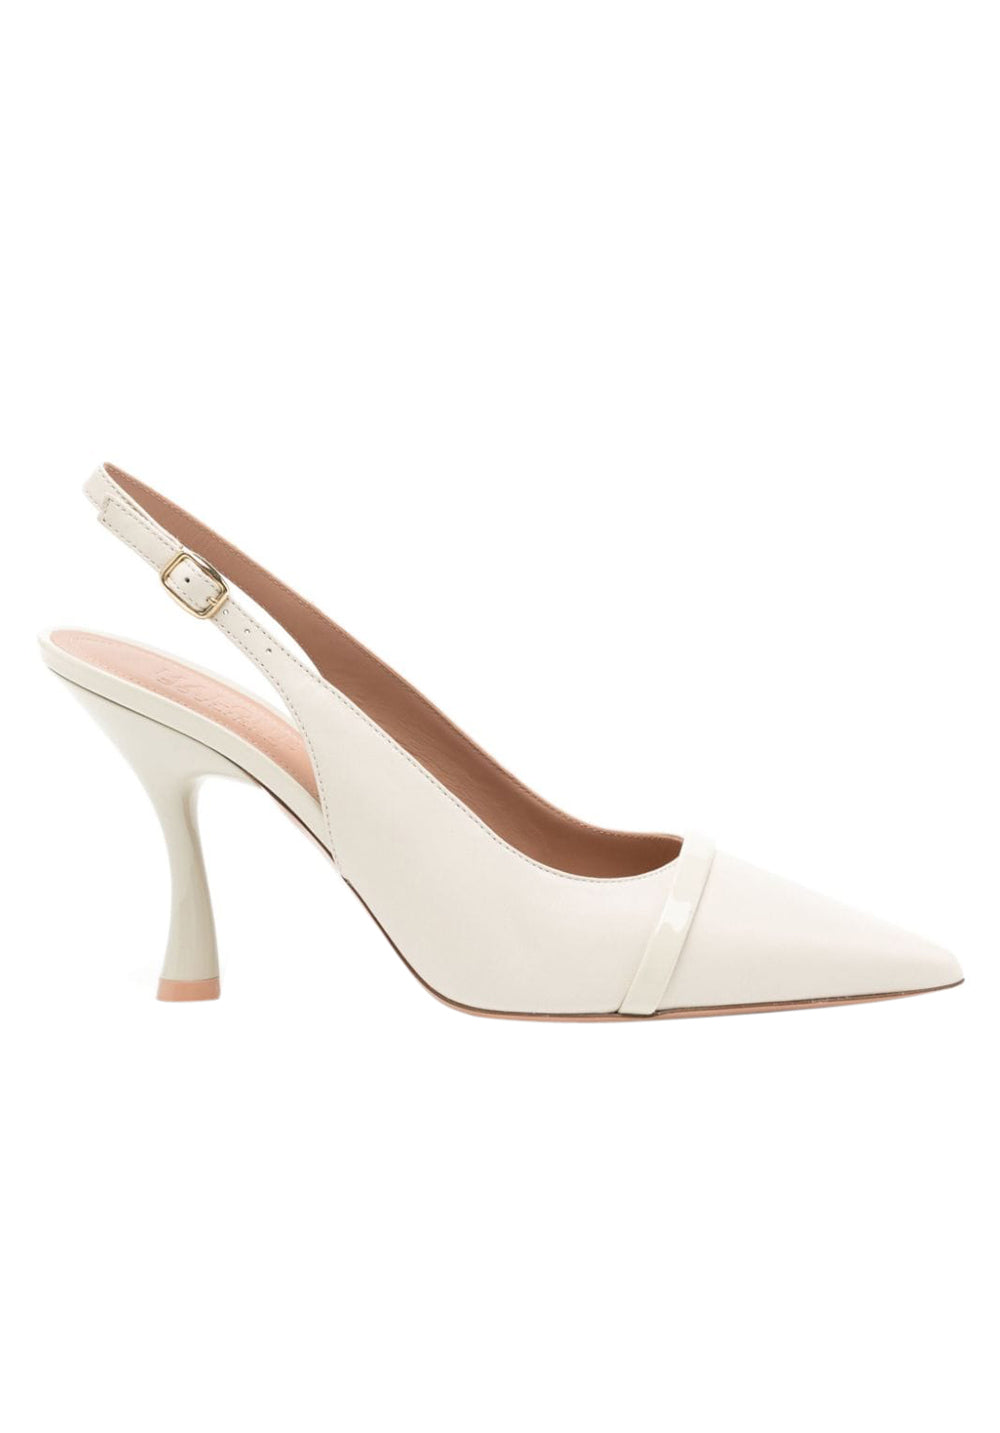 MALONE SOULIERS Jama 90mm Leather Pumps